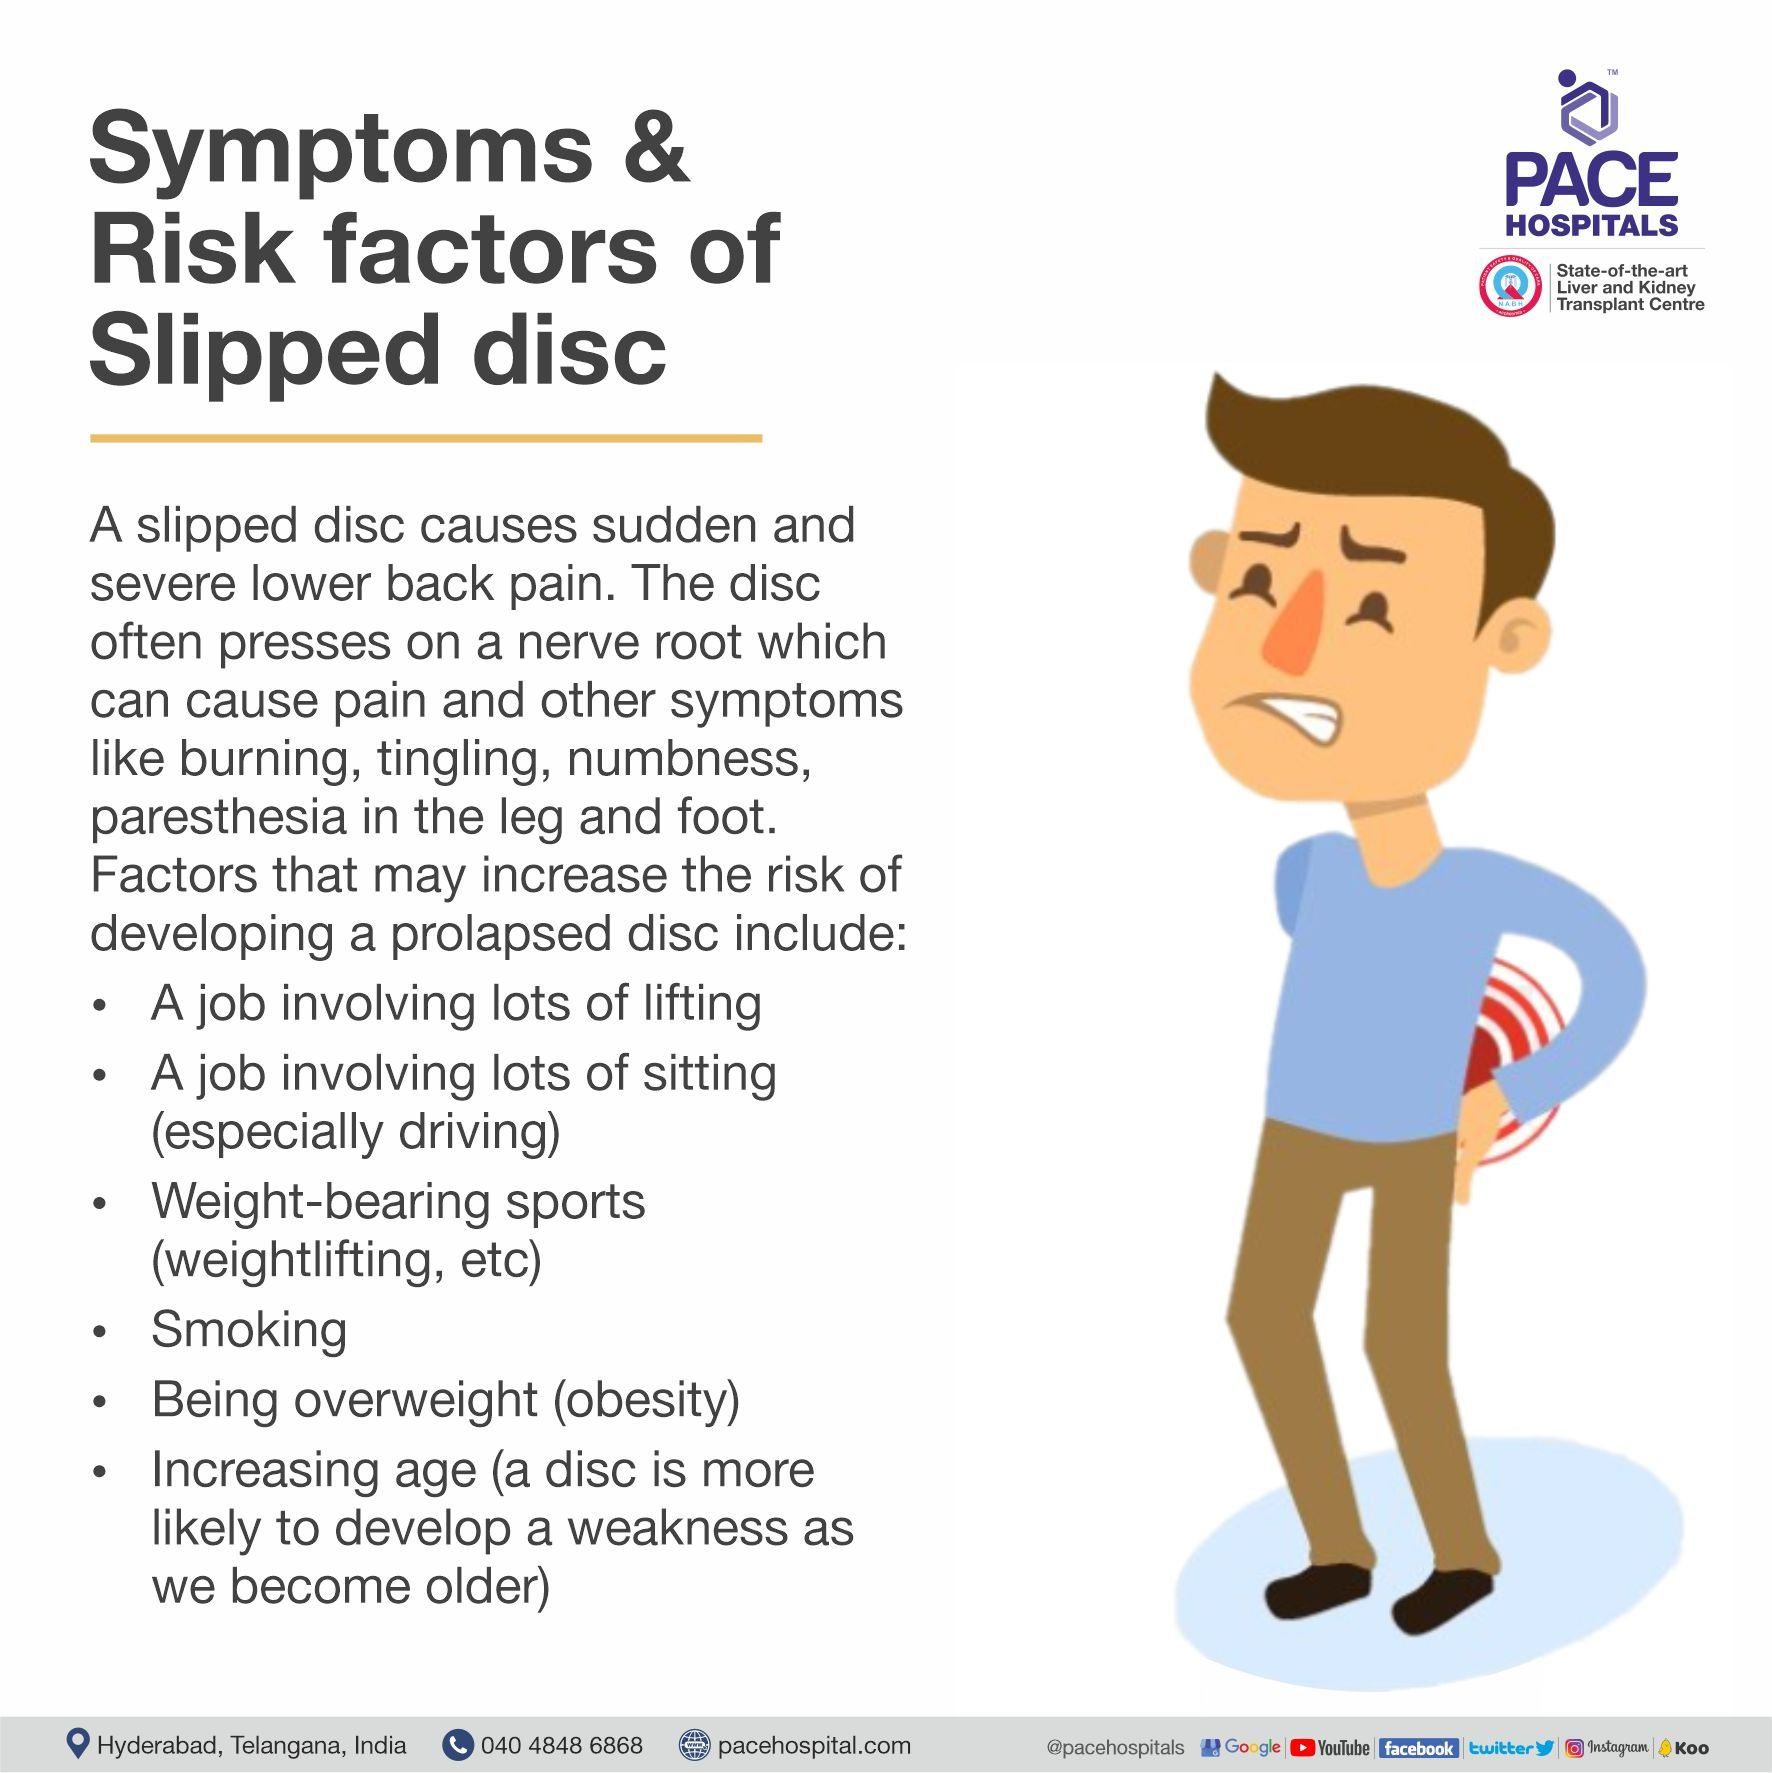 disc prolapse - slipped disc symptoms and risk factors